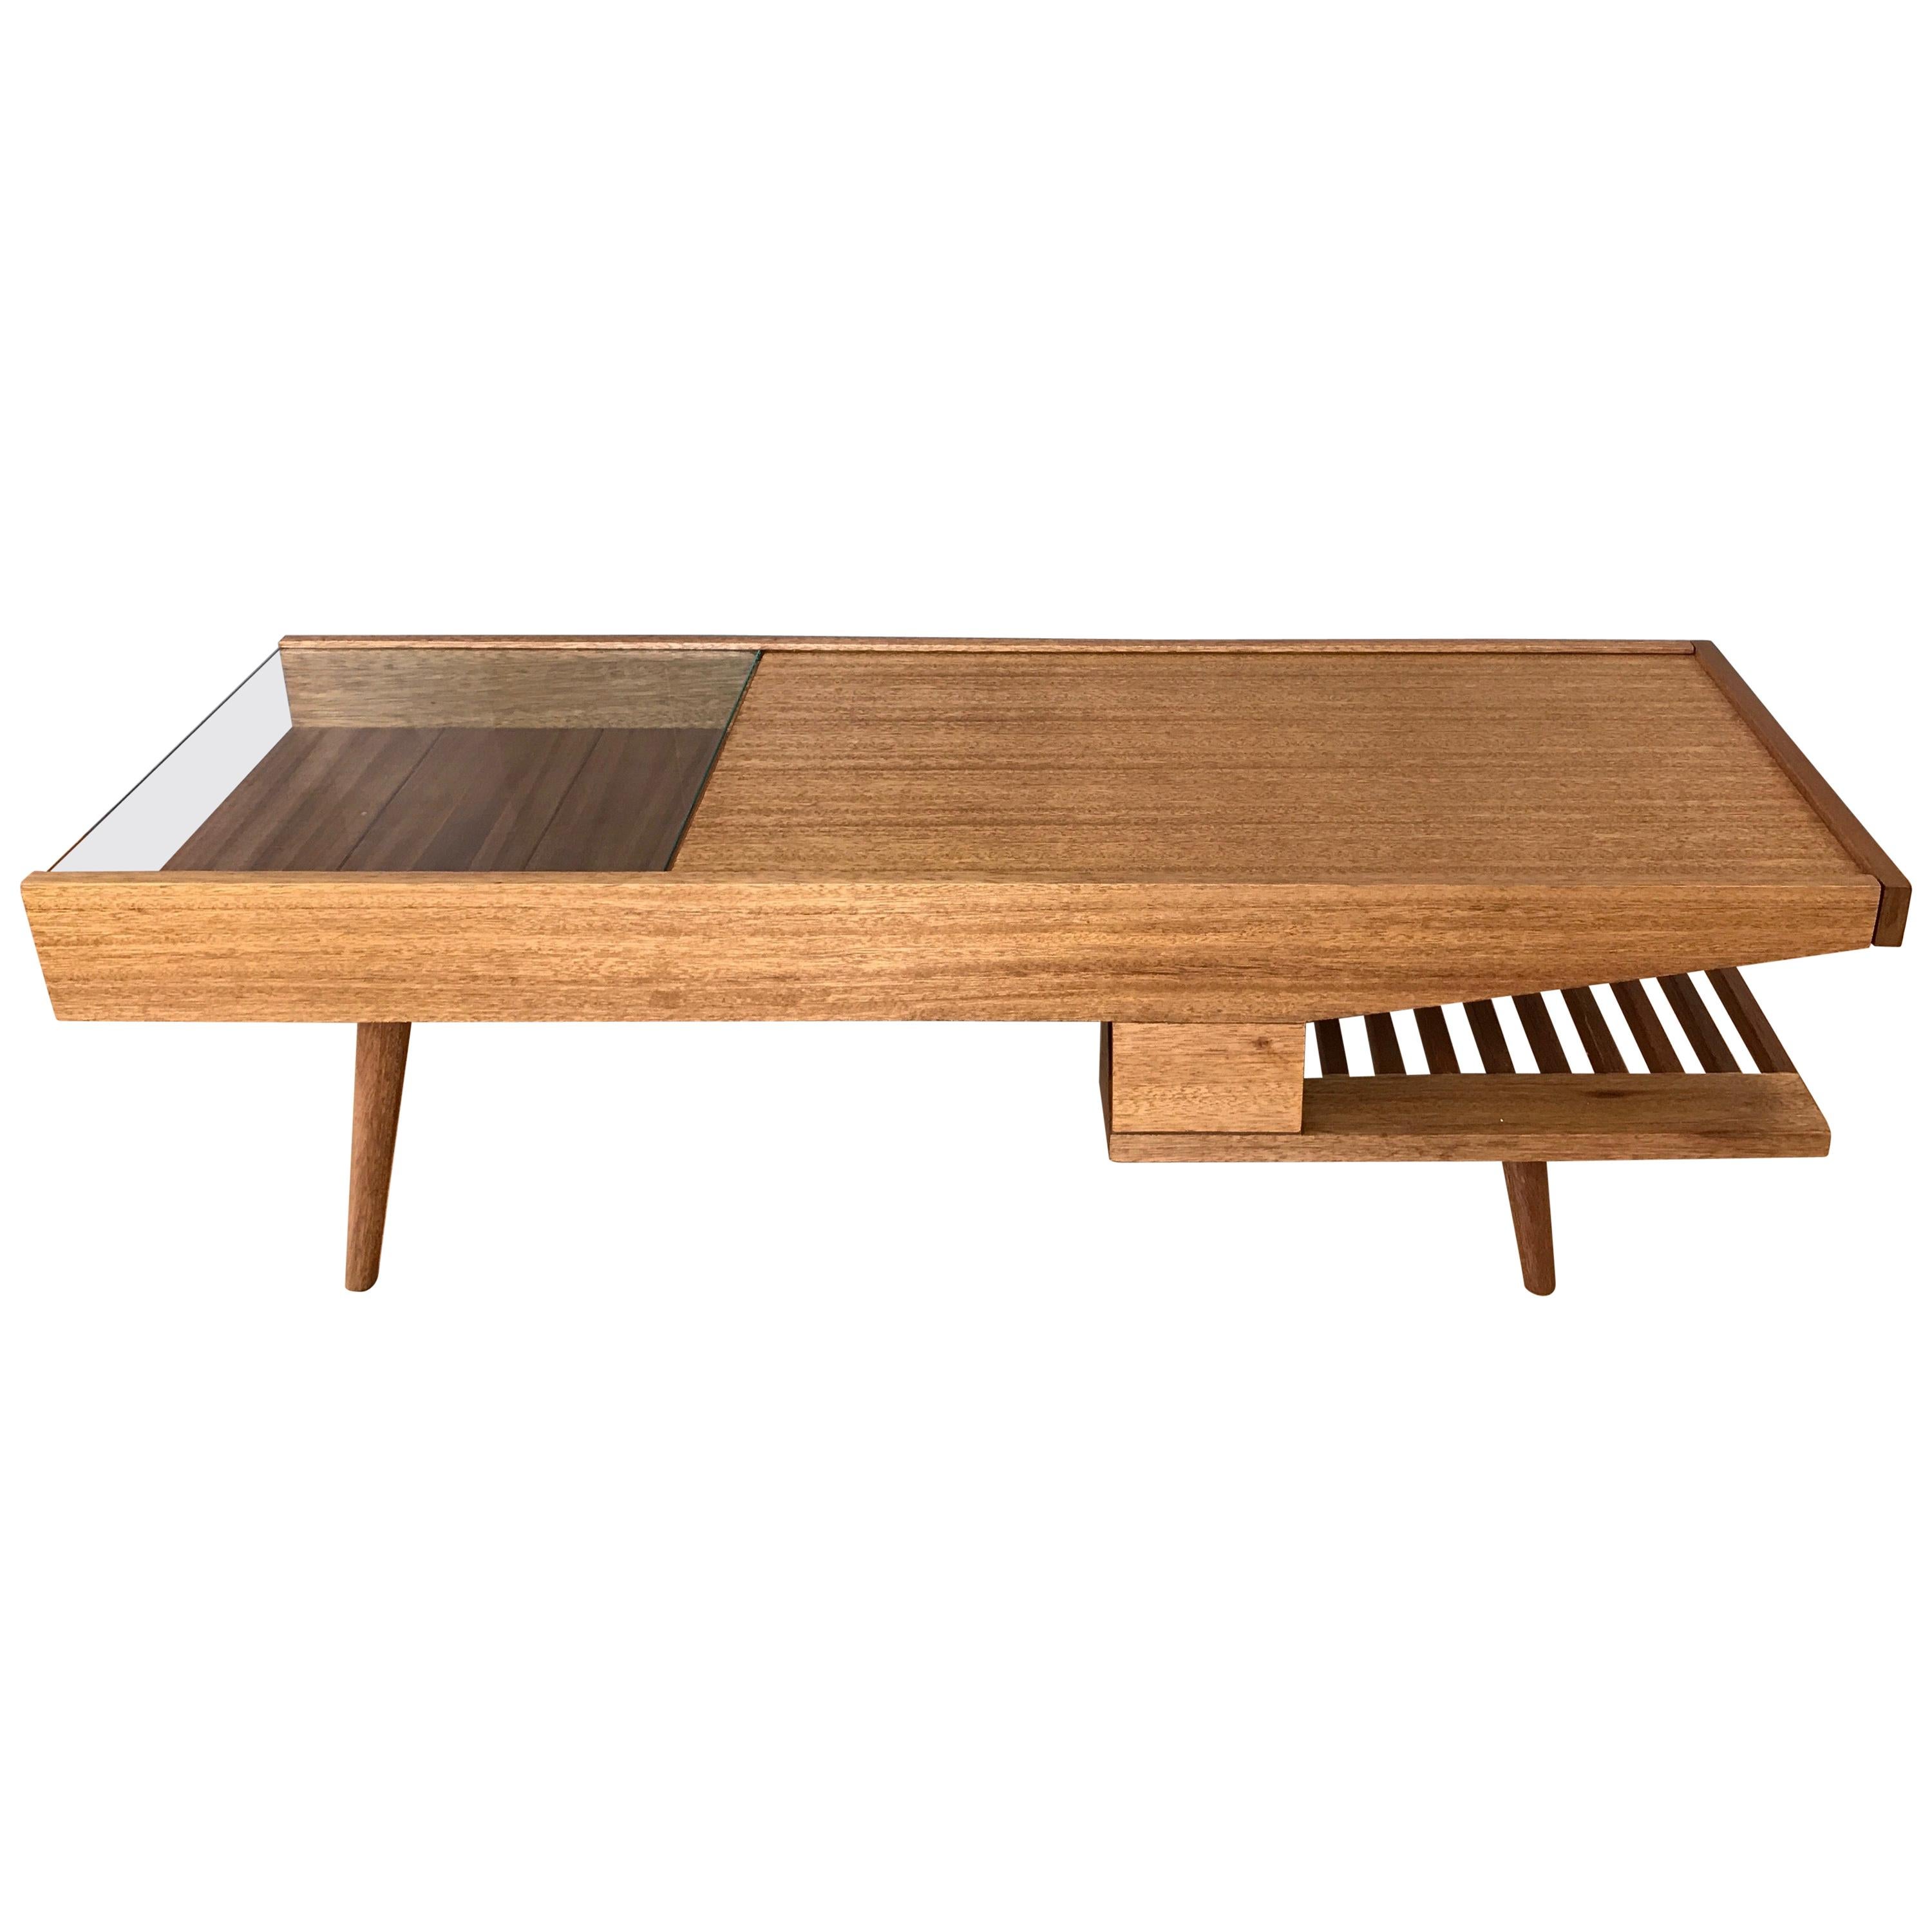 John Keal for Brown-Saltman Mahogany Coffee Table with Built-In Warmer, 1950s